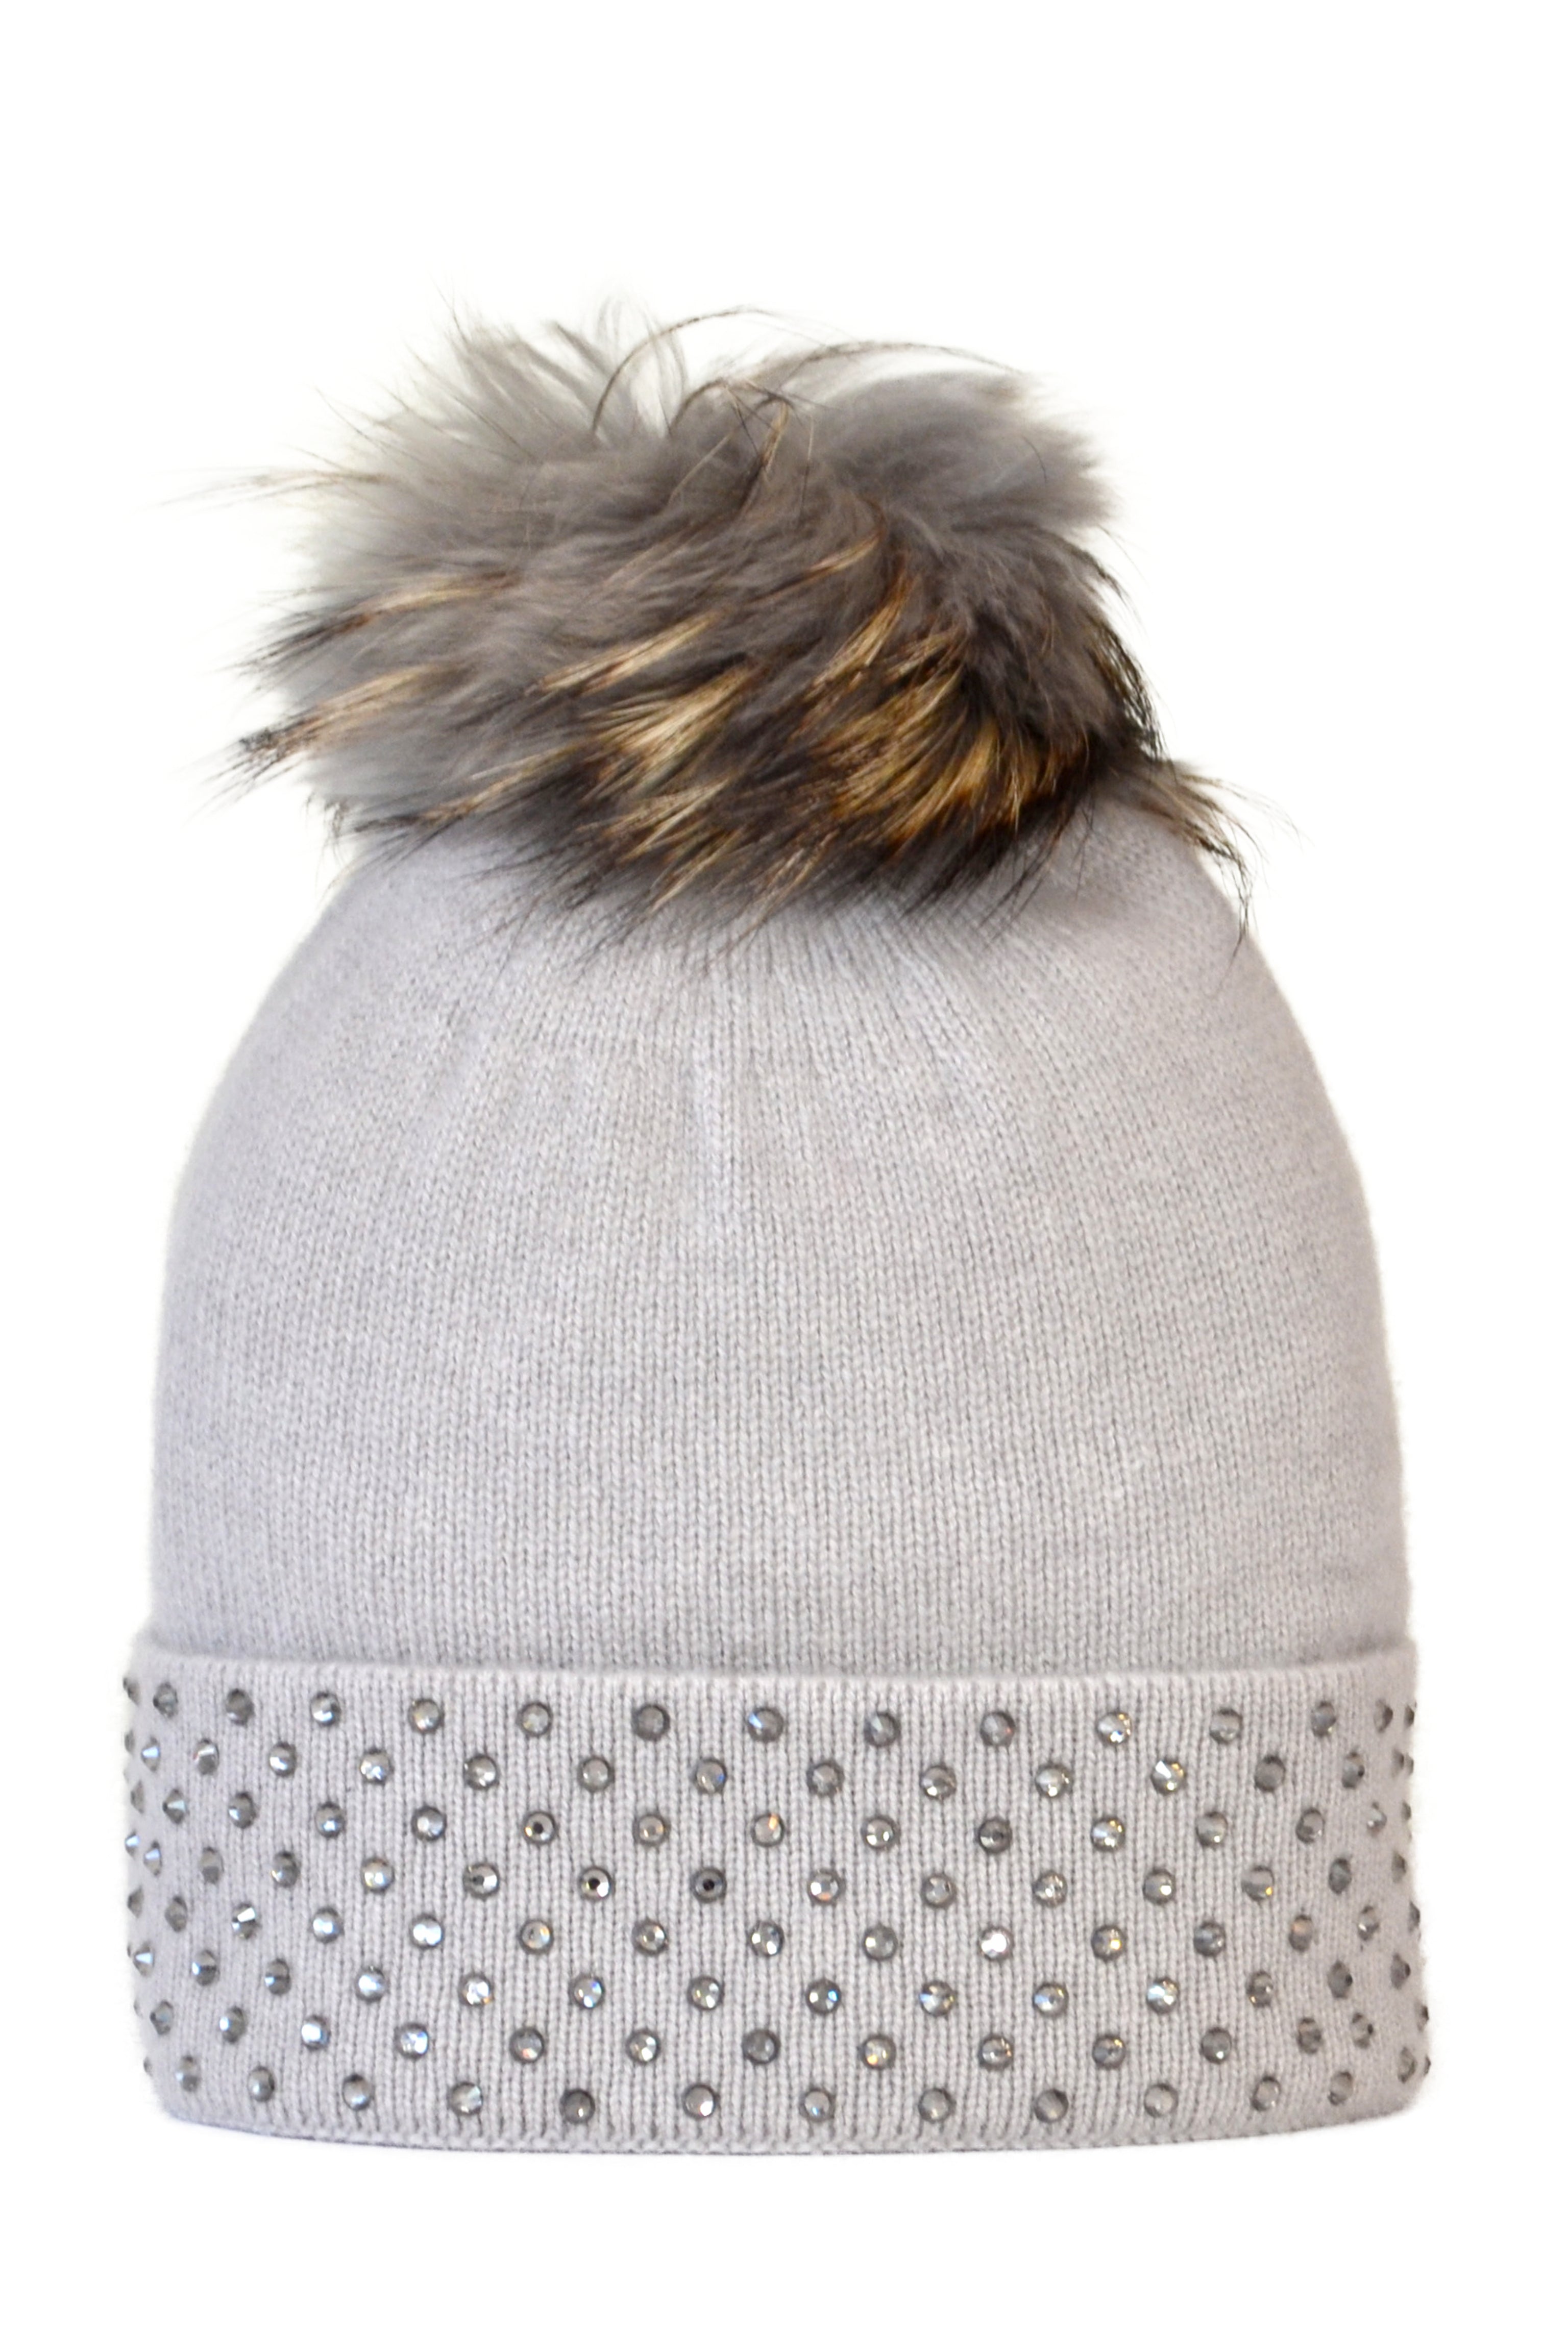 Dove Gray Cashmere Beanie with Crystals on Fold Over & Dove Gray Pom